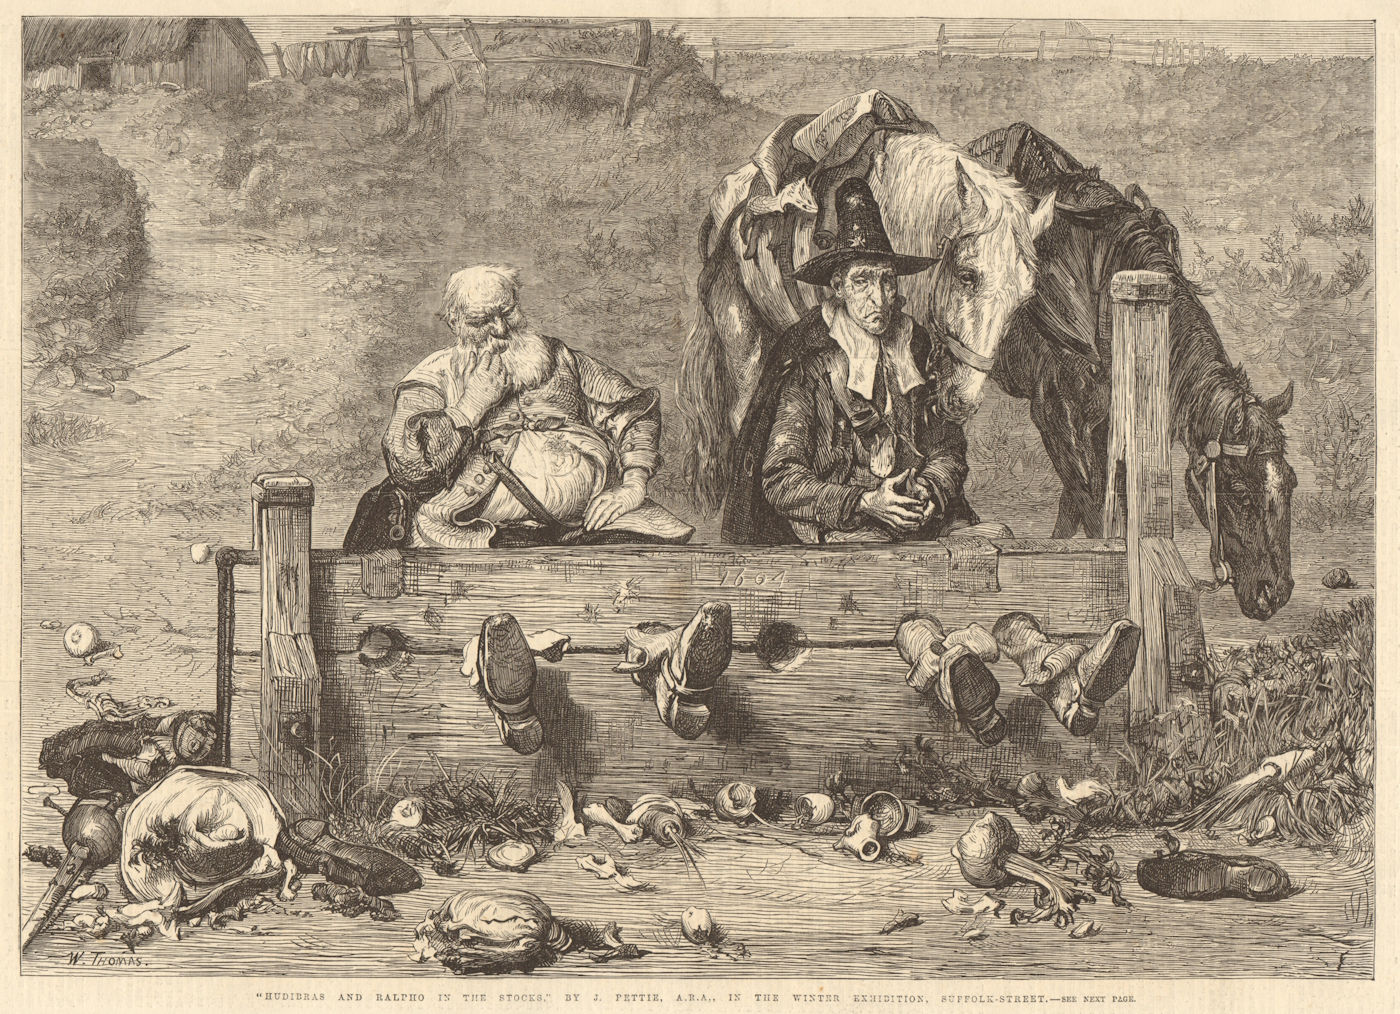 Associate Product "Hudibras & Ralpho in the stocks" by J. Pettie, A. R. A. England 1866